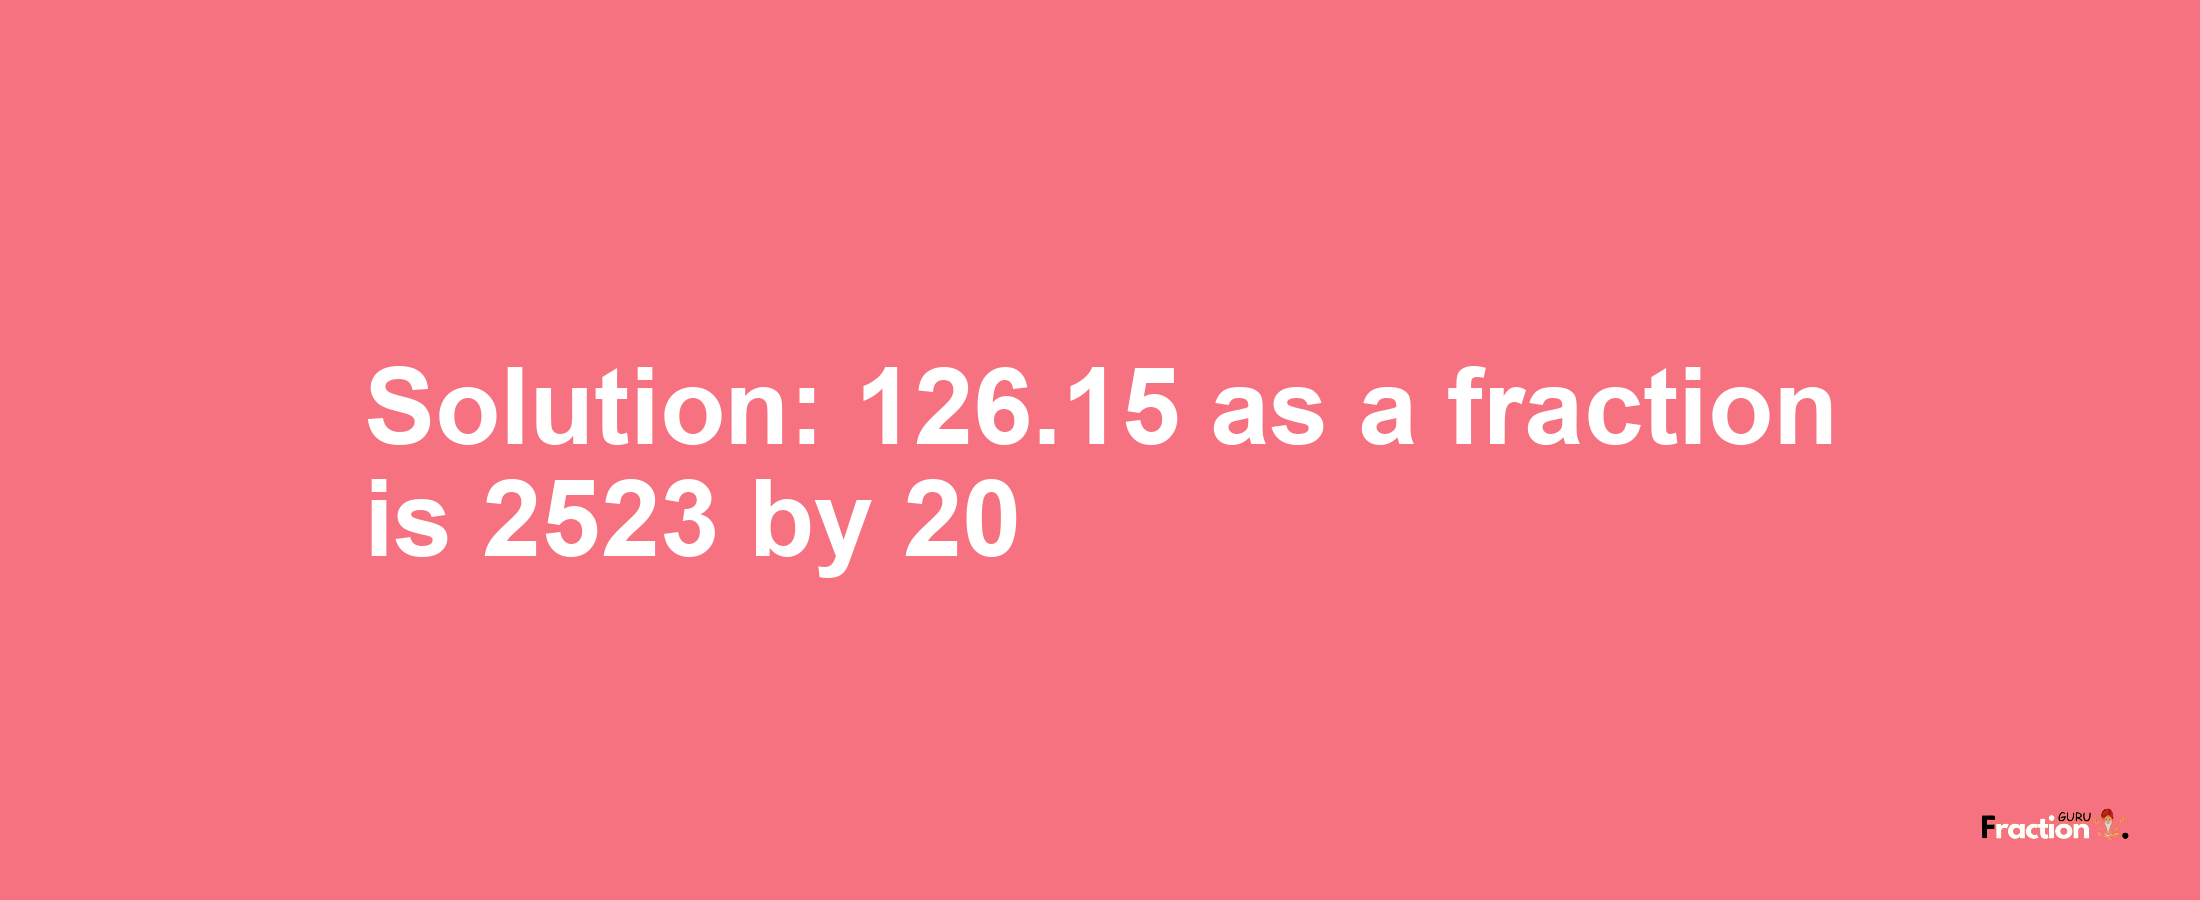 Solution:126.15 as a fraction is 2523/20